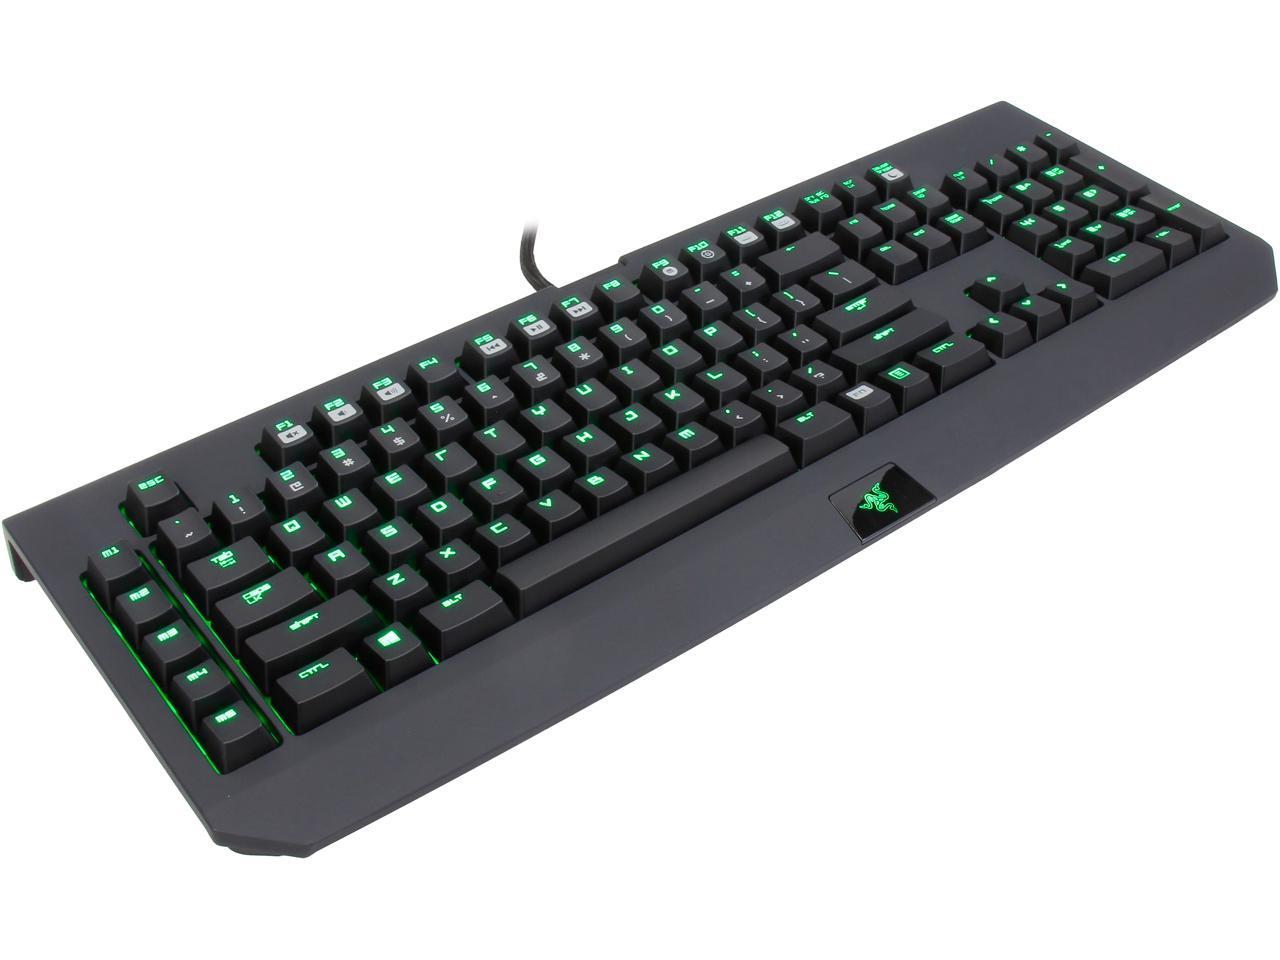 How To Change The Color Of My Razer Keyboard ~ How To Control The